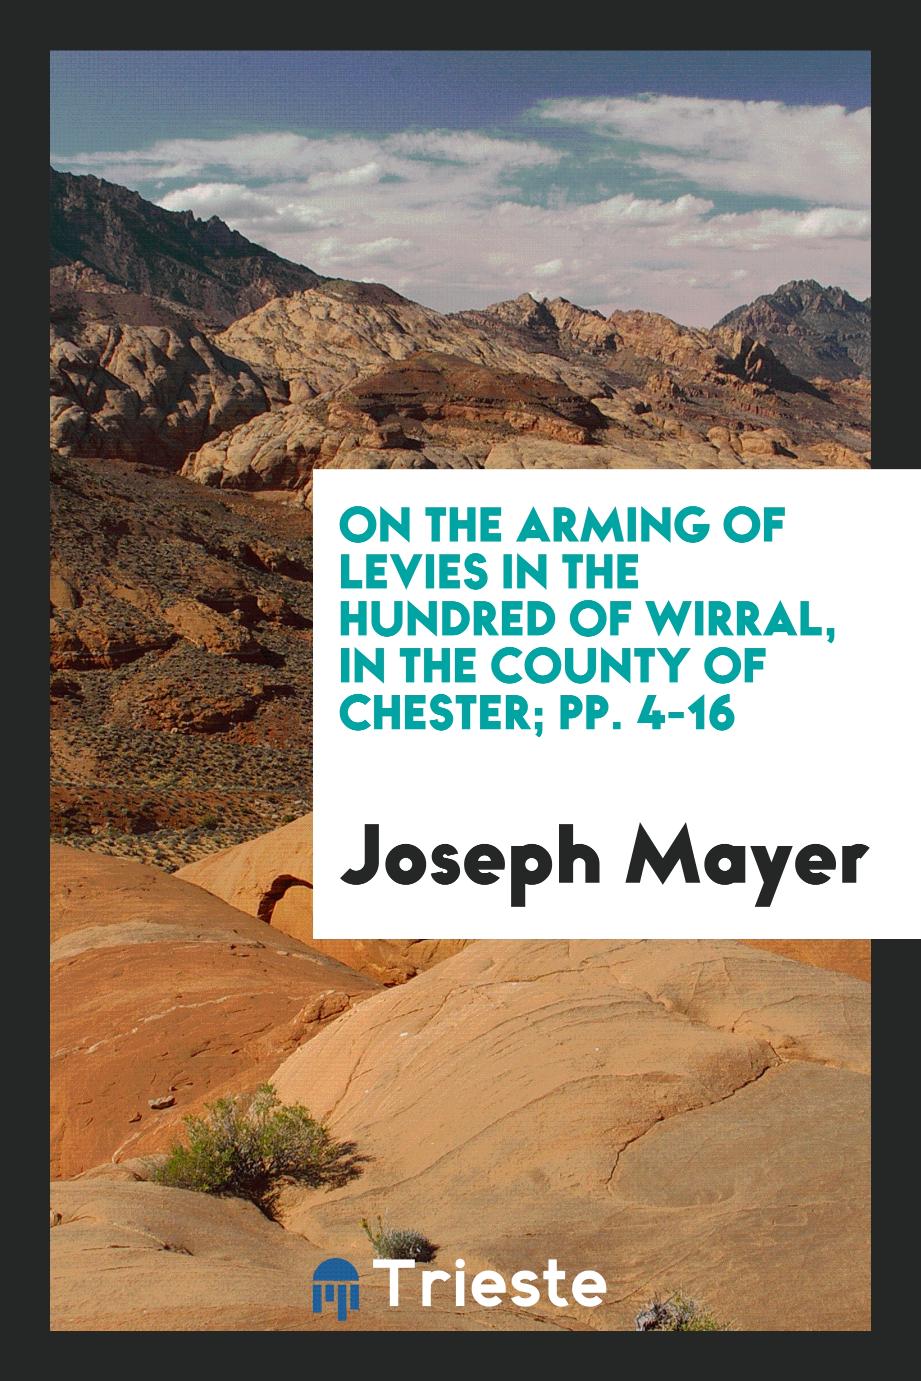 On the Arming of Levies in the Hundred of Wirral, in the County of Chester; pp. 4-16